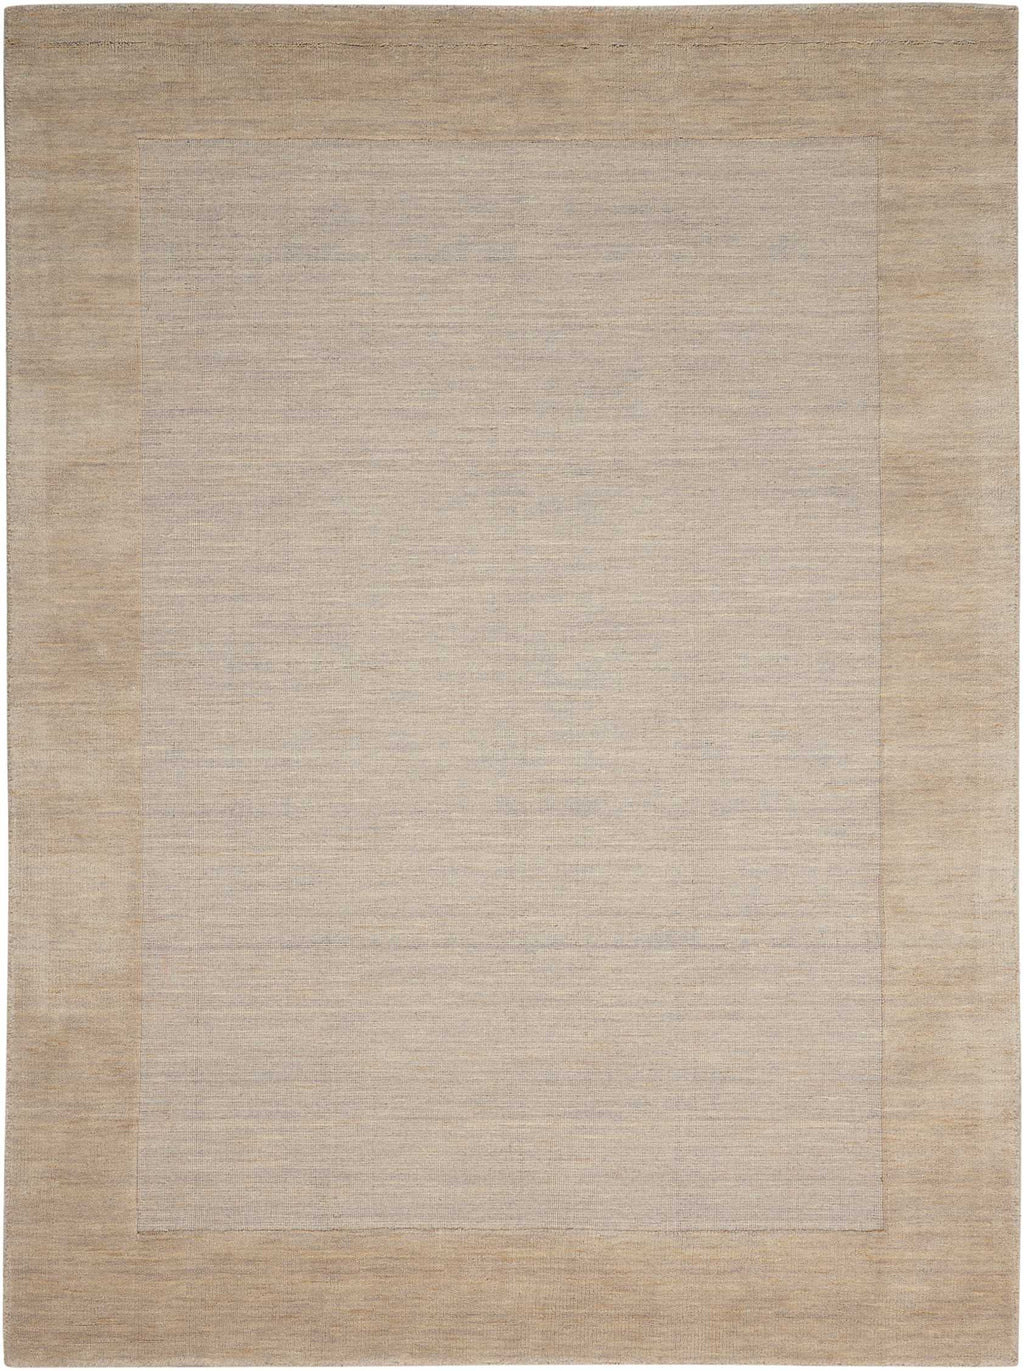 Barclay Butera Ripple Tranquil Area Rug by Nourison